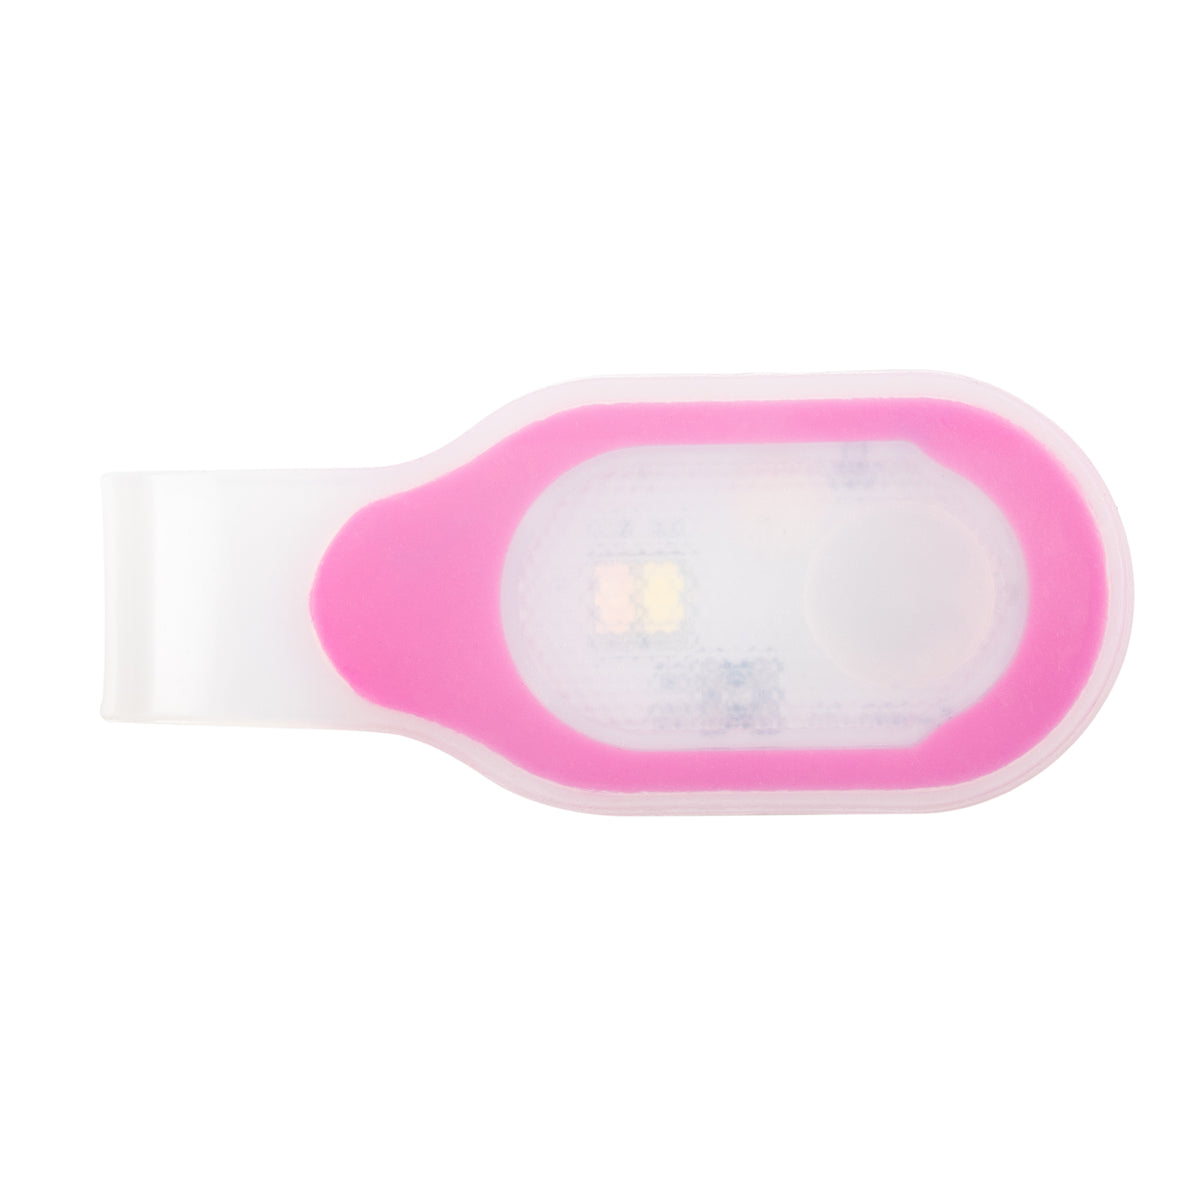 LED Wearable Lights for Nurses with Hands-Free Magnetic Clip for Clothing and Scrubs - Pink - First Lifesaver